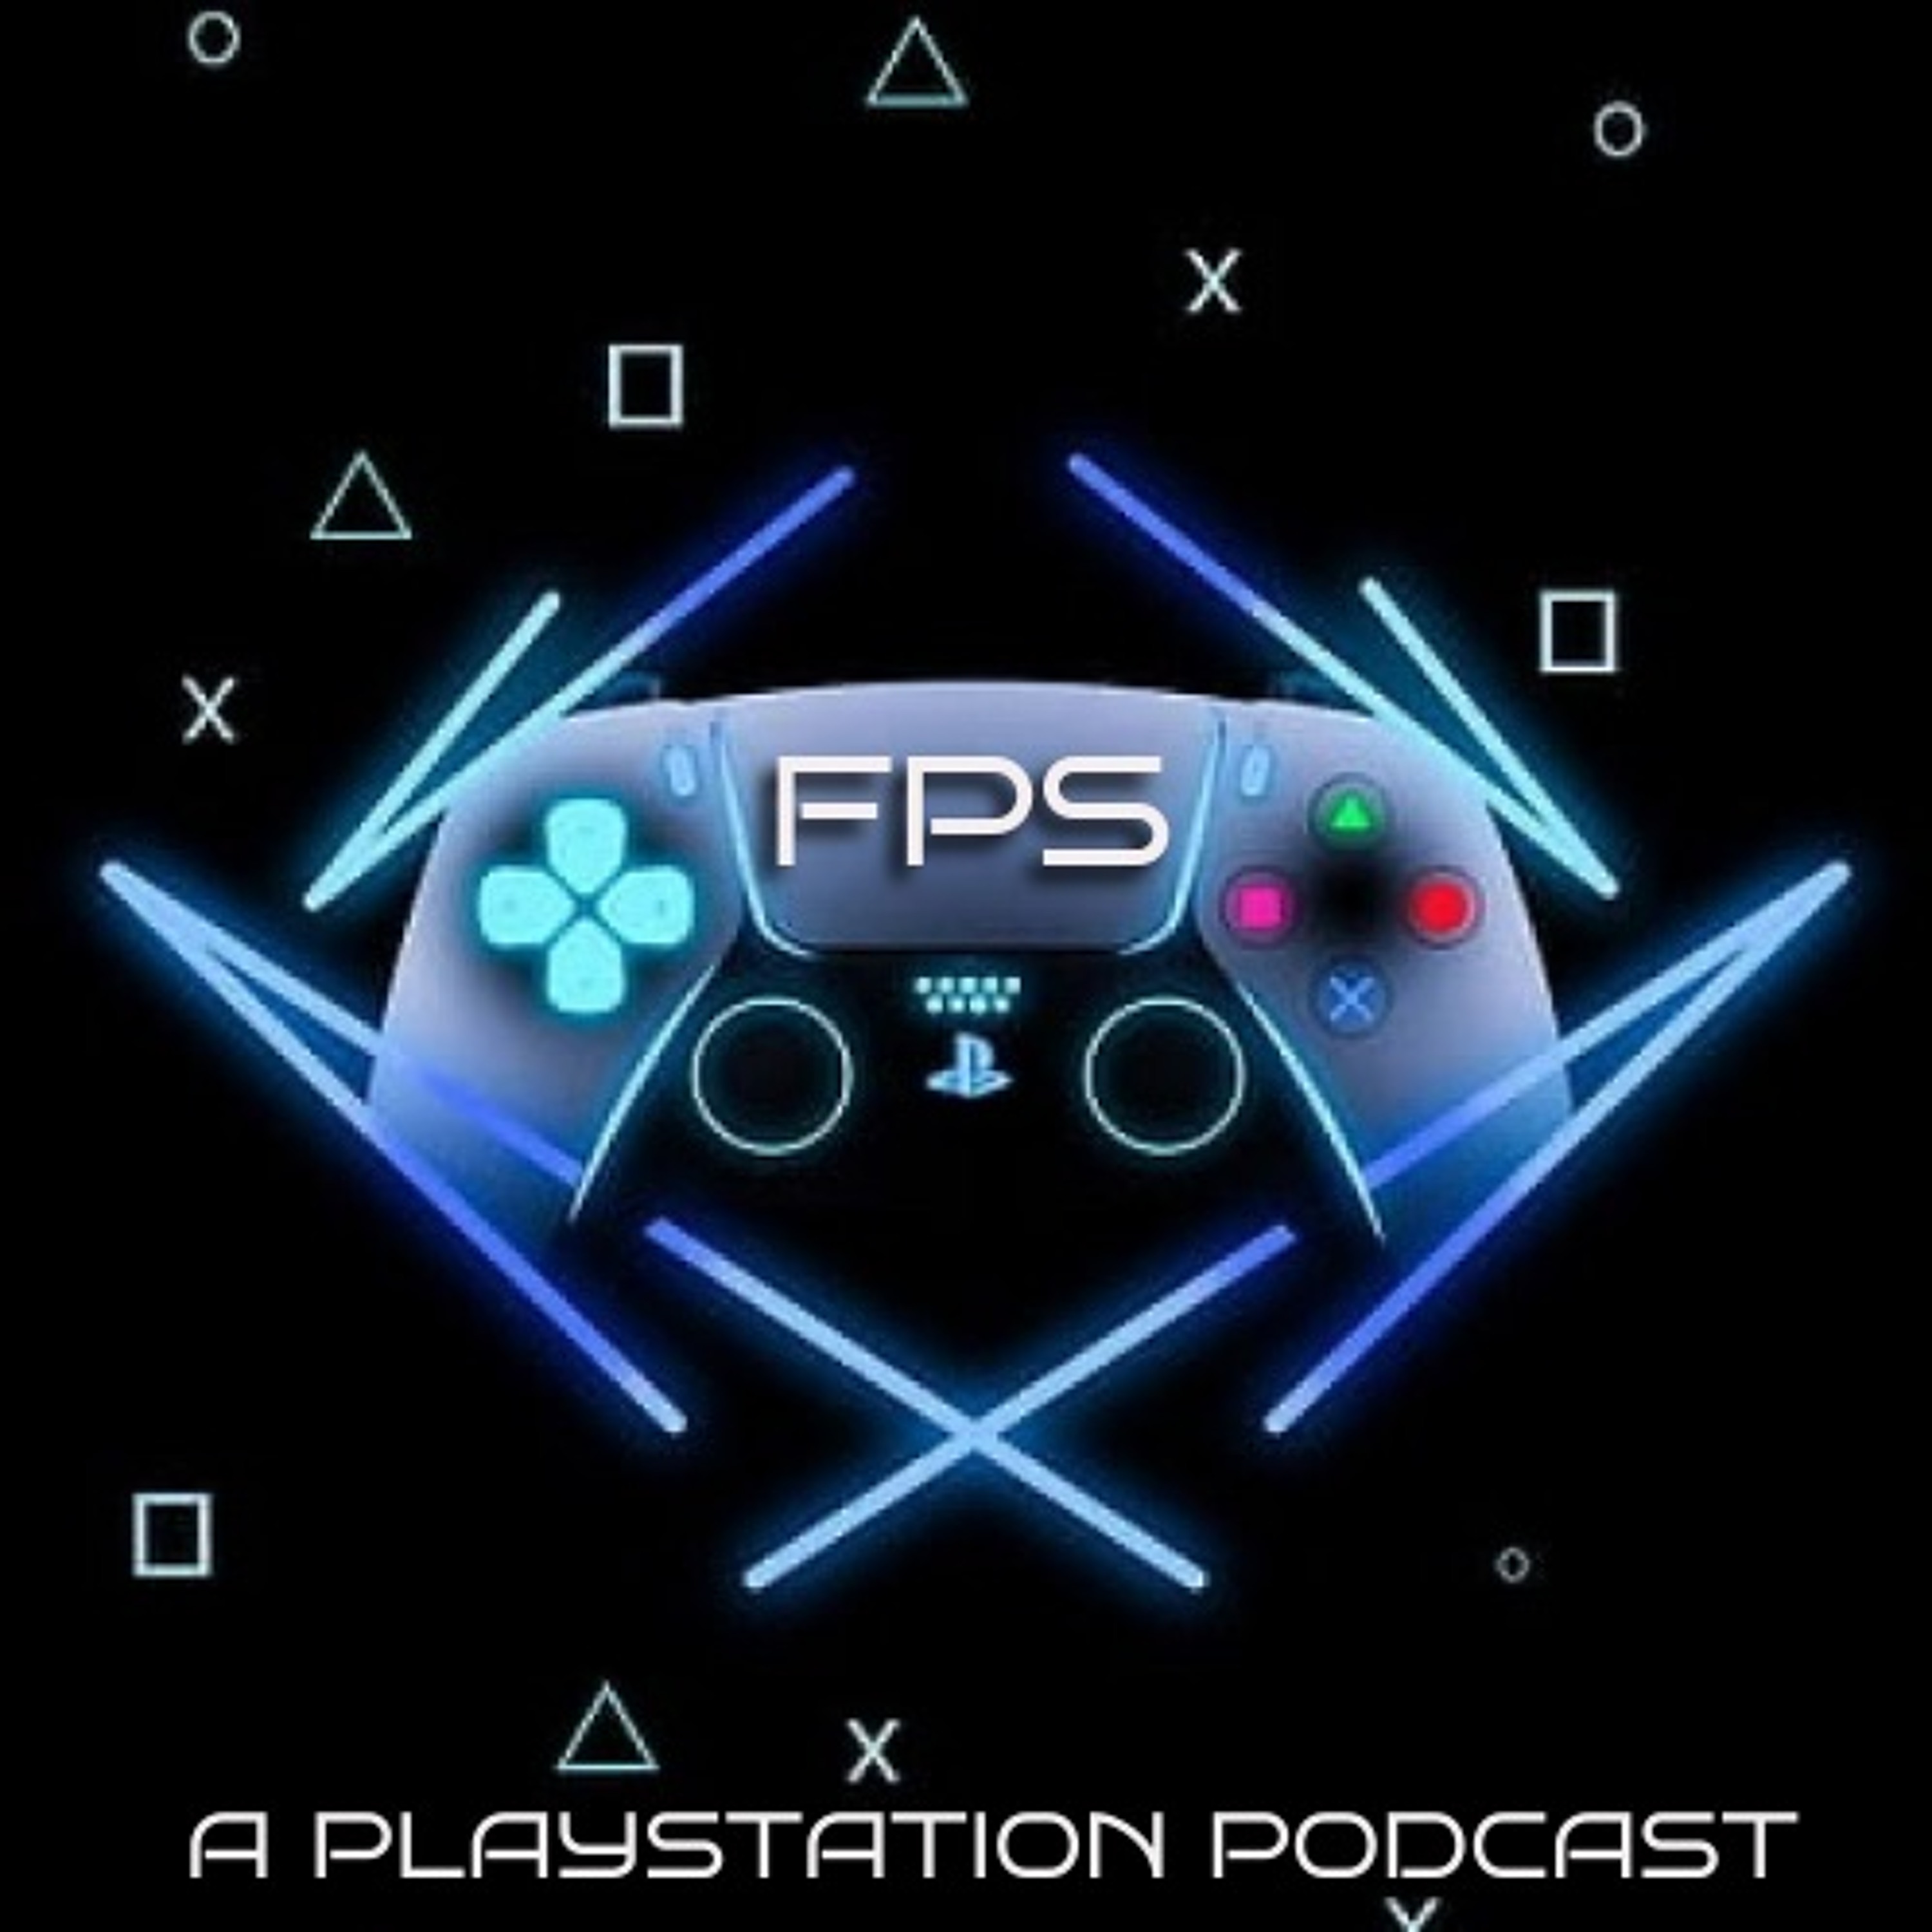 A Father’s PlayStation Ep: 191 - Do You Need Help With That